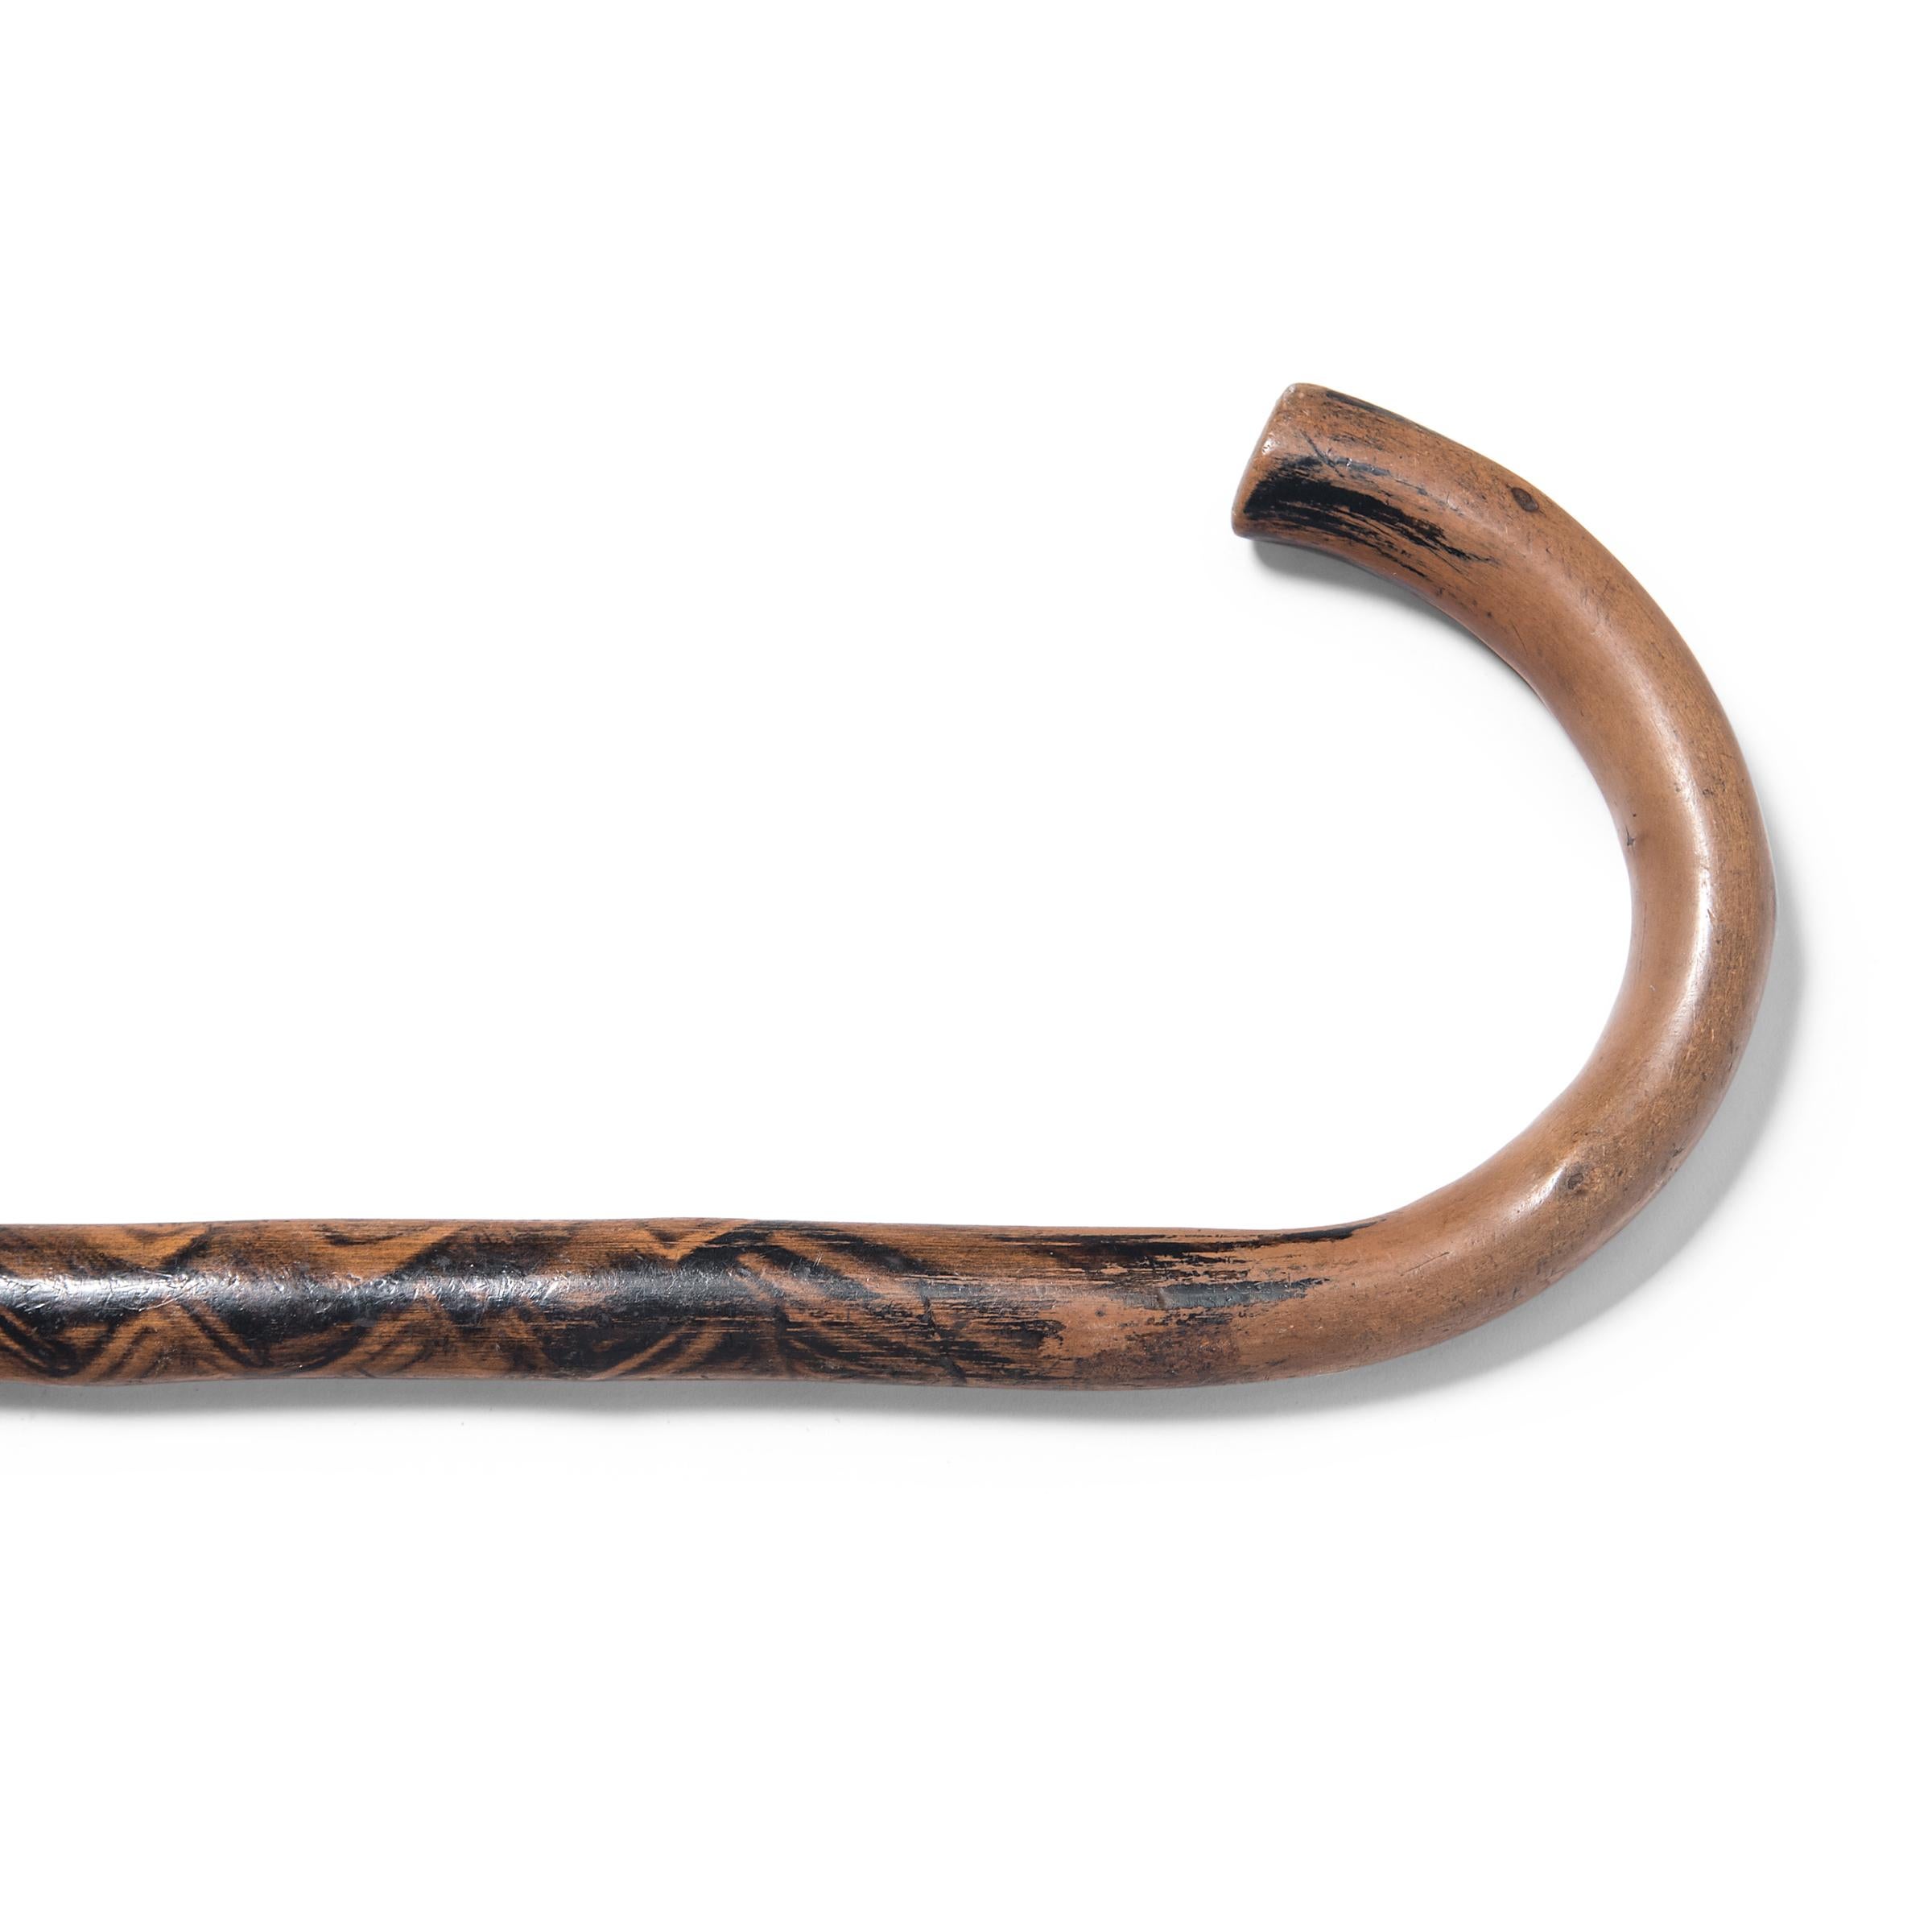 This late 19th-century walking stick from northern China is painted with swirling black ink in rhythmic brushstrokes. The curving handle has been burnished from a century of use, lending the staff soft warmth in contrast to the darkened surface.